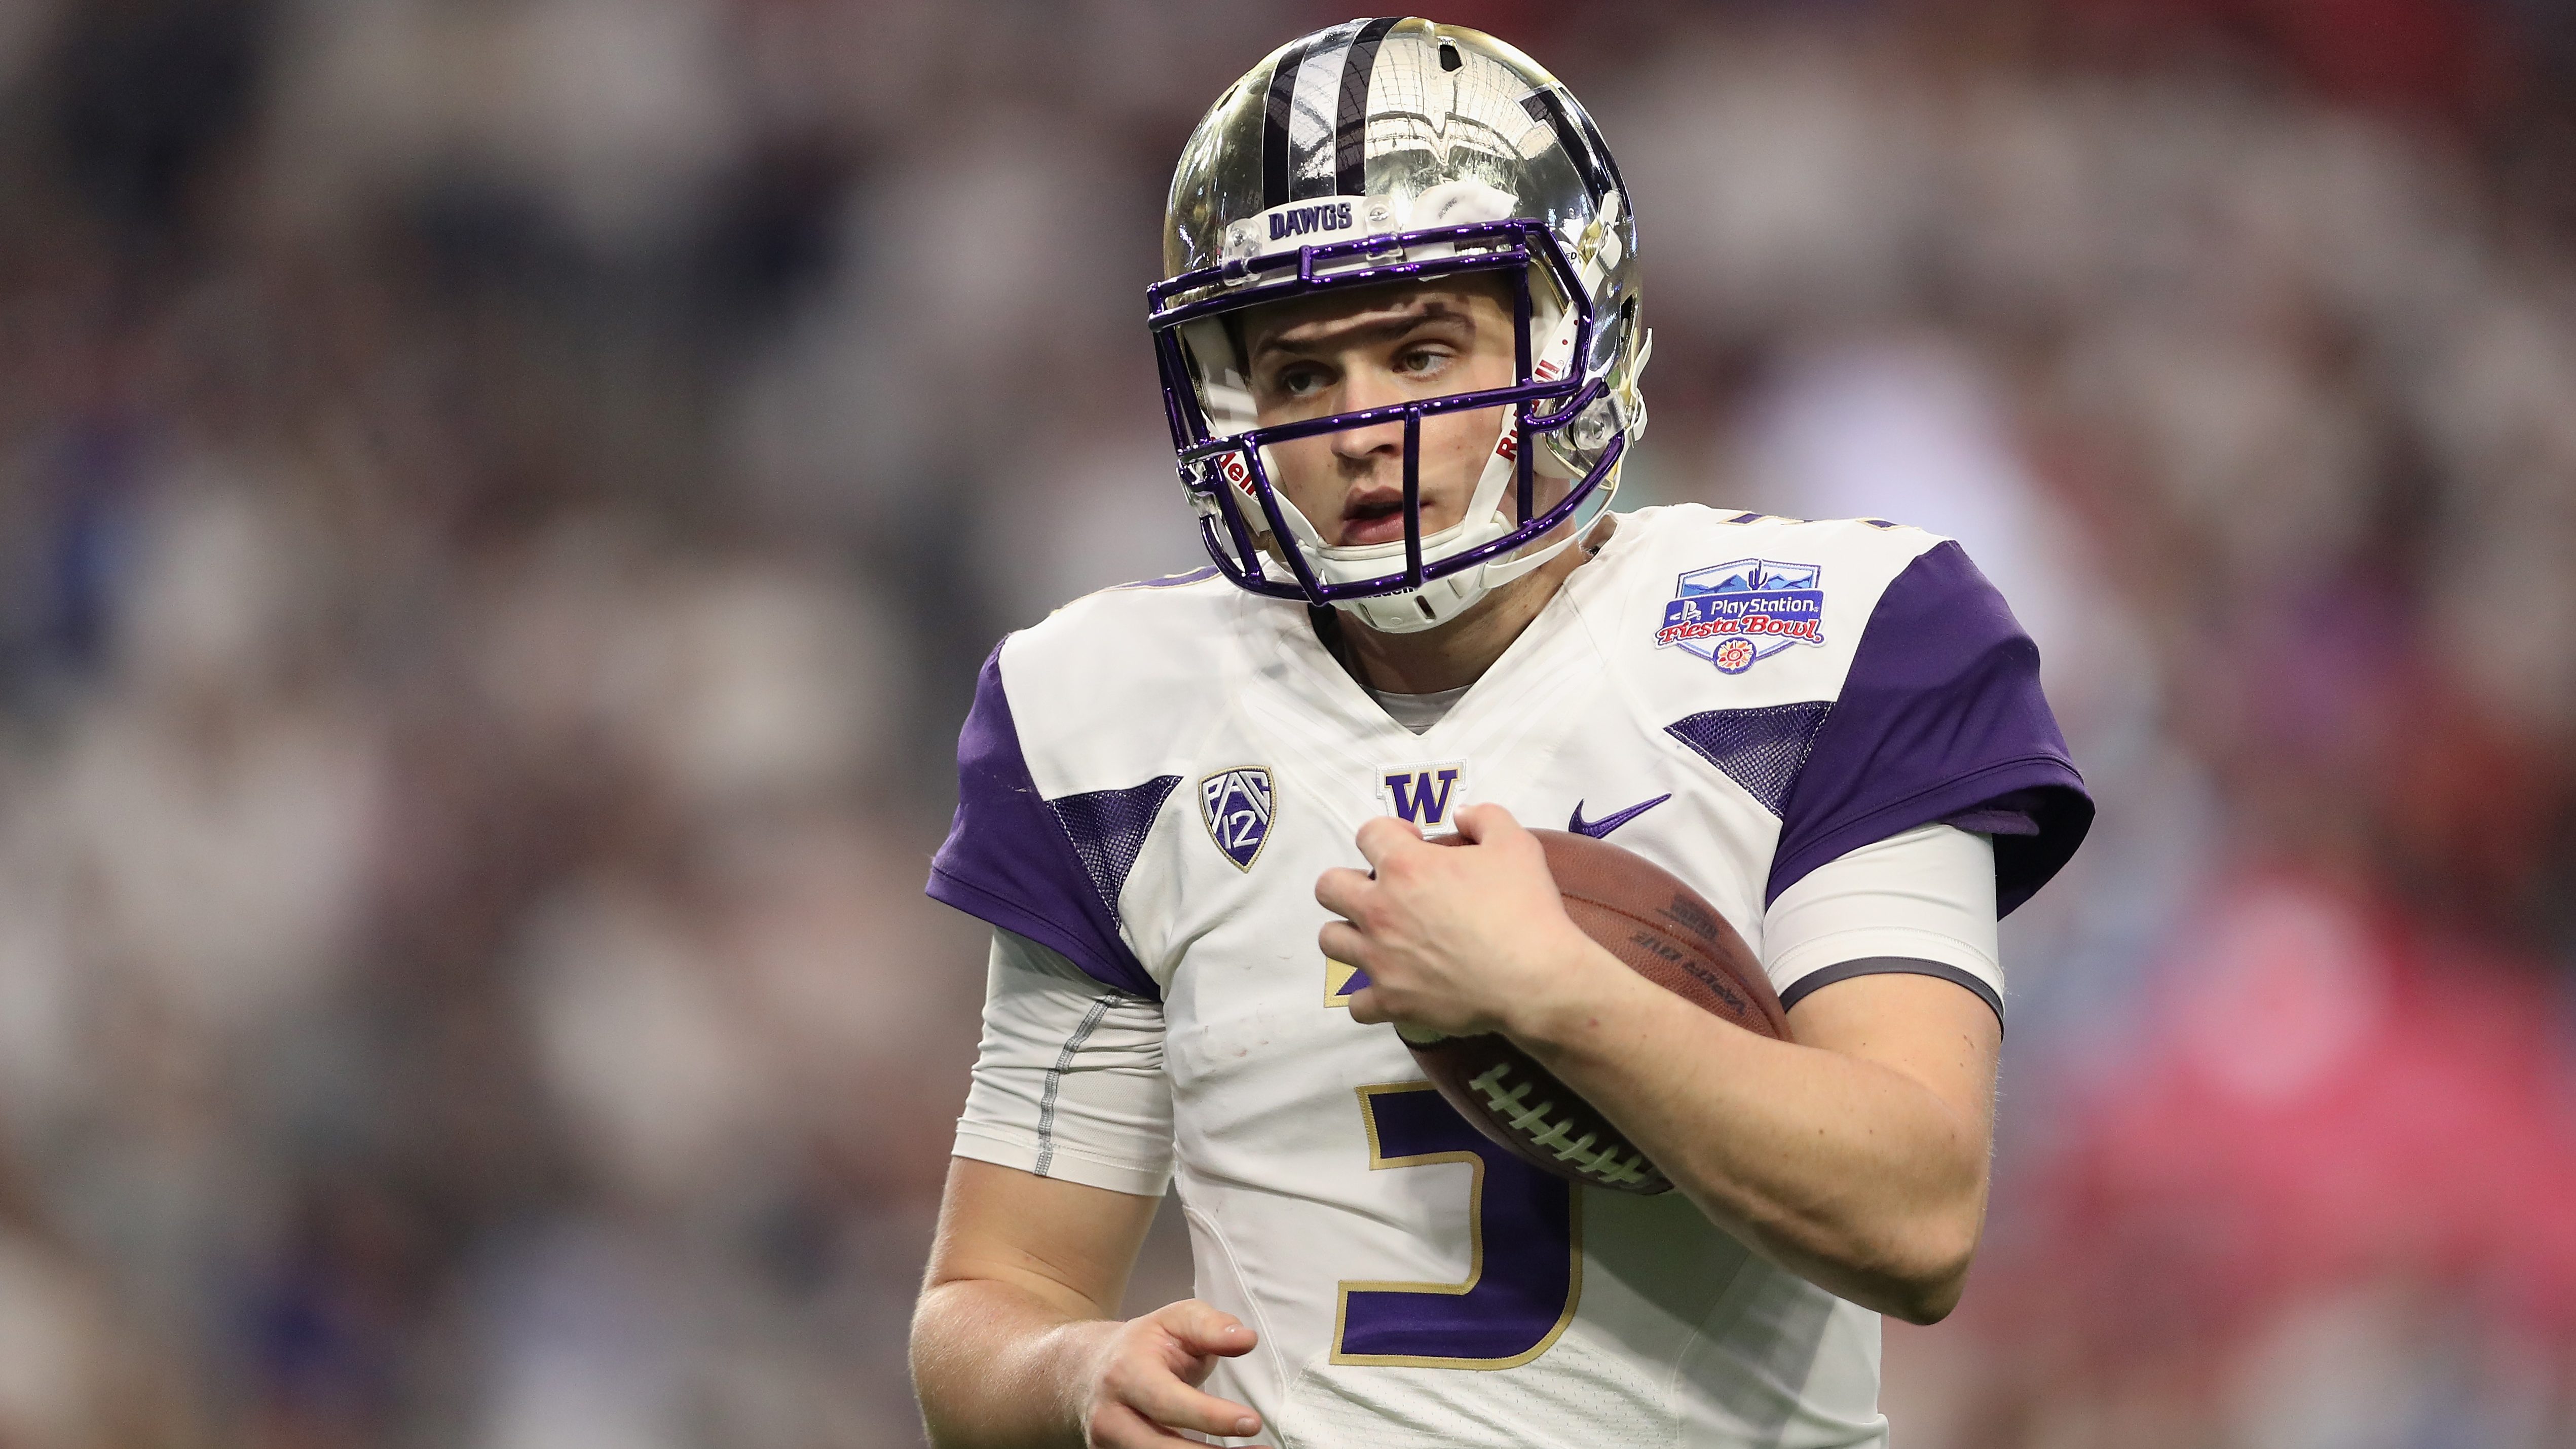 How to Watch Washington Spring Game Online Without Cable